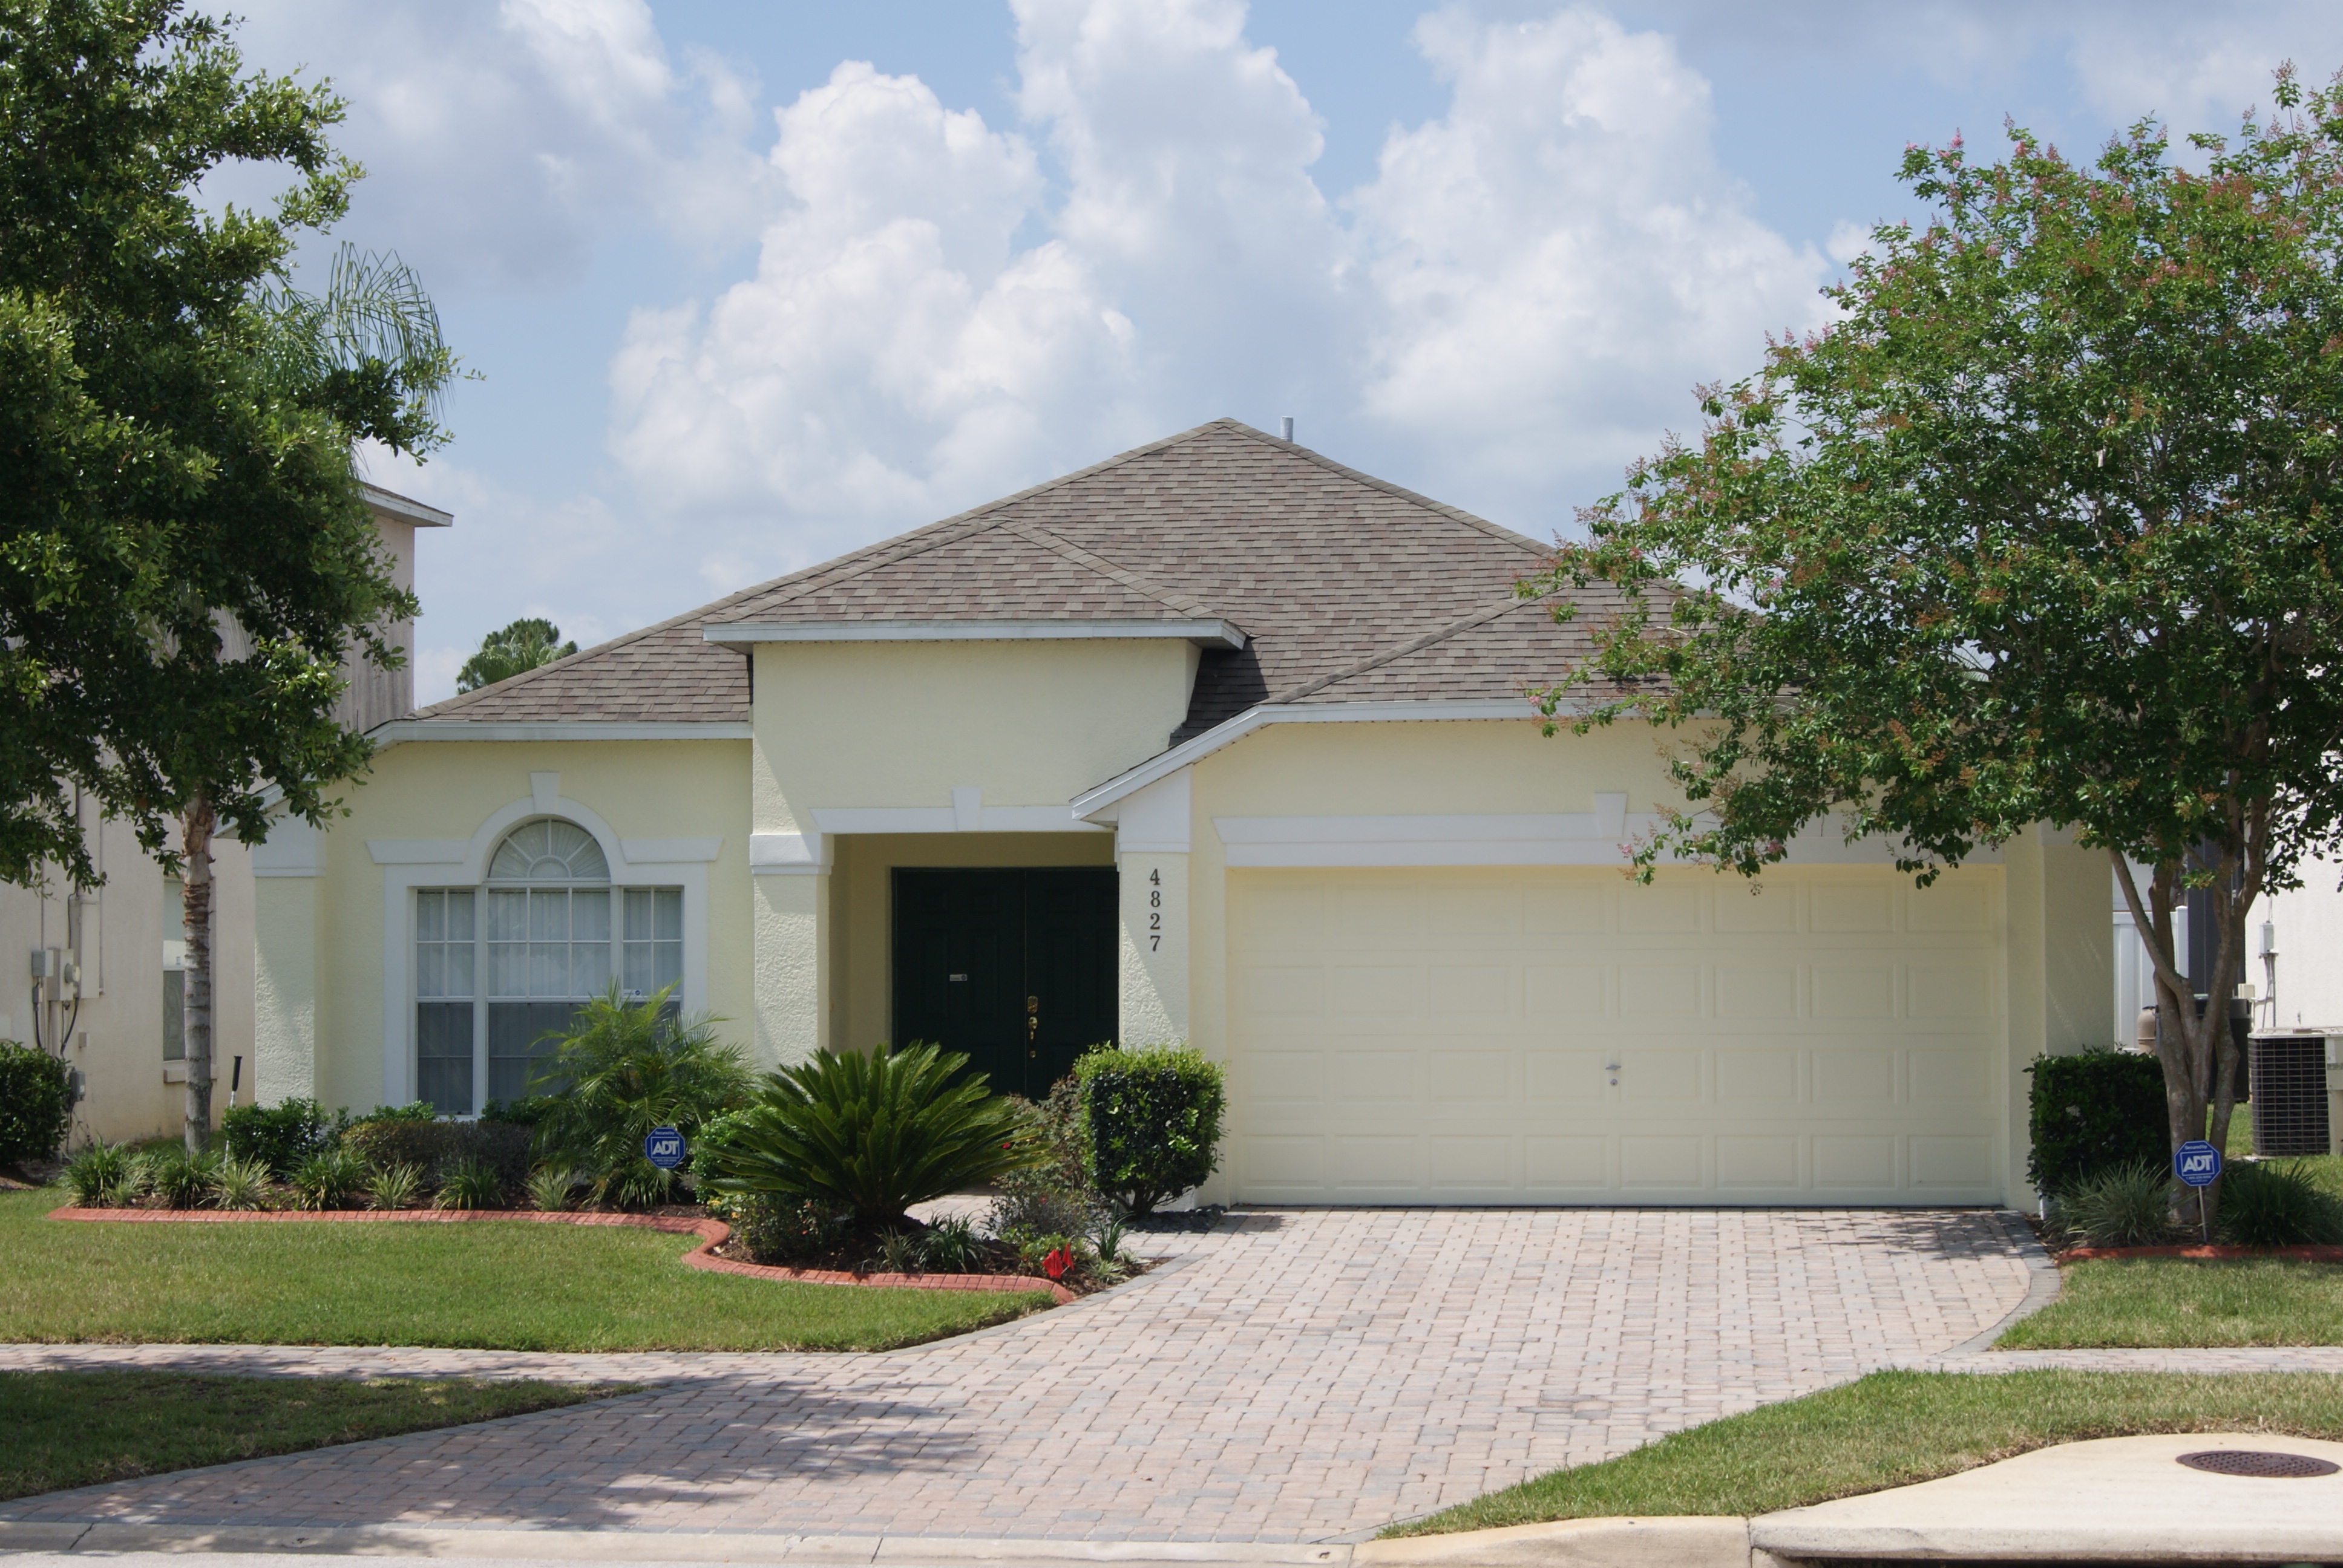 ‘Welcome to ‘Kissimmee Holiday Home’ 10 minutes from Disney, Orlando, Florida!